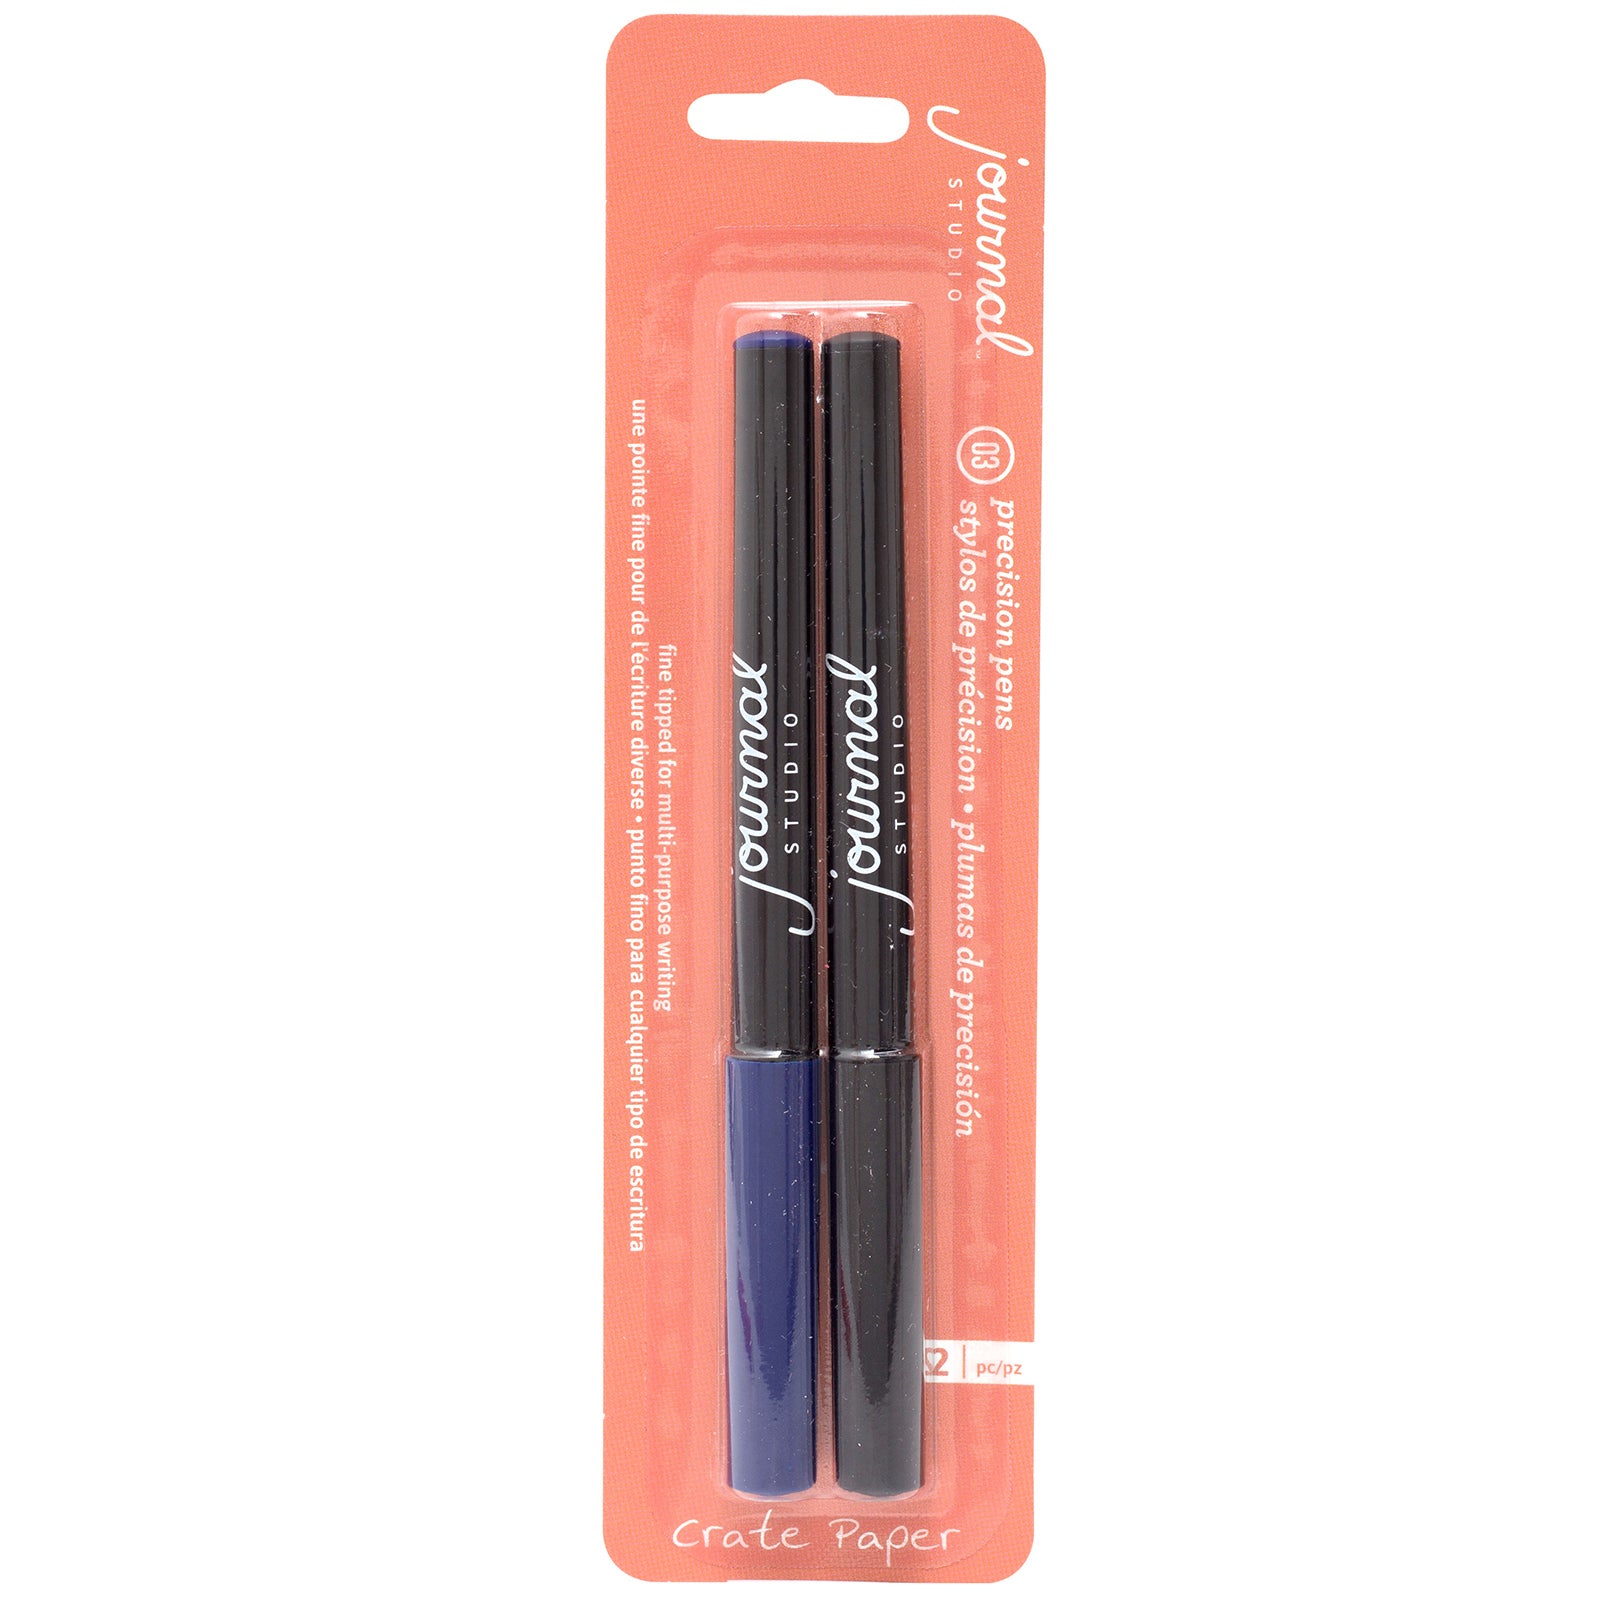 Journaling Pens in Blue and Black for Discount Cardstock paper